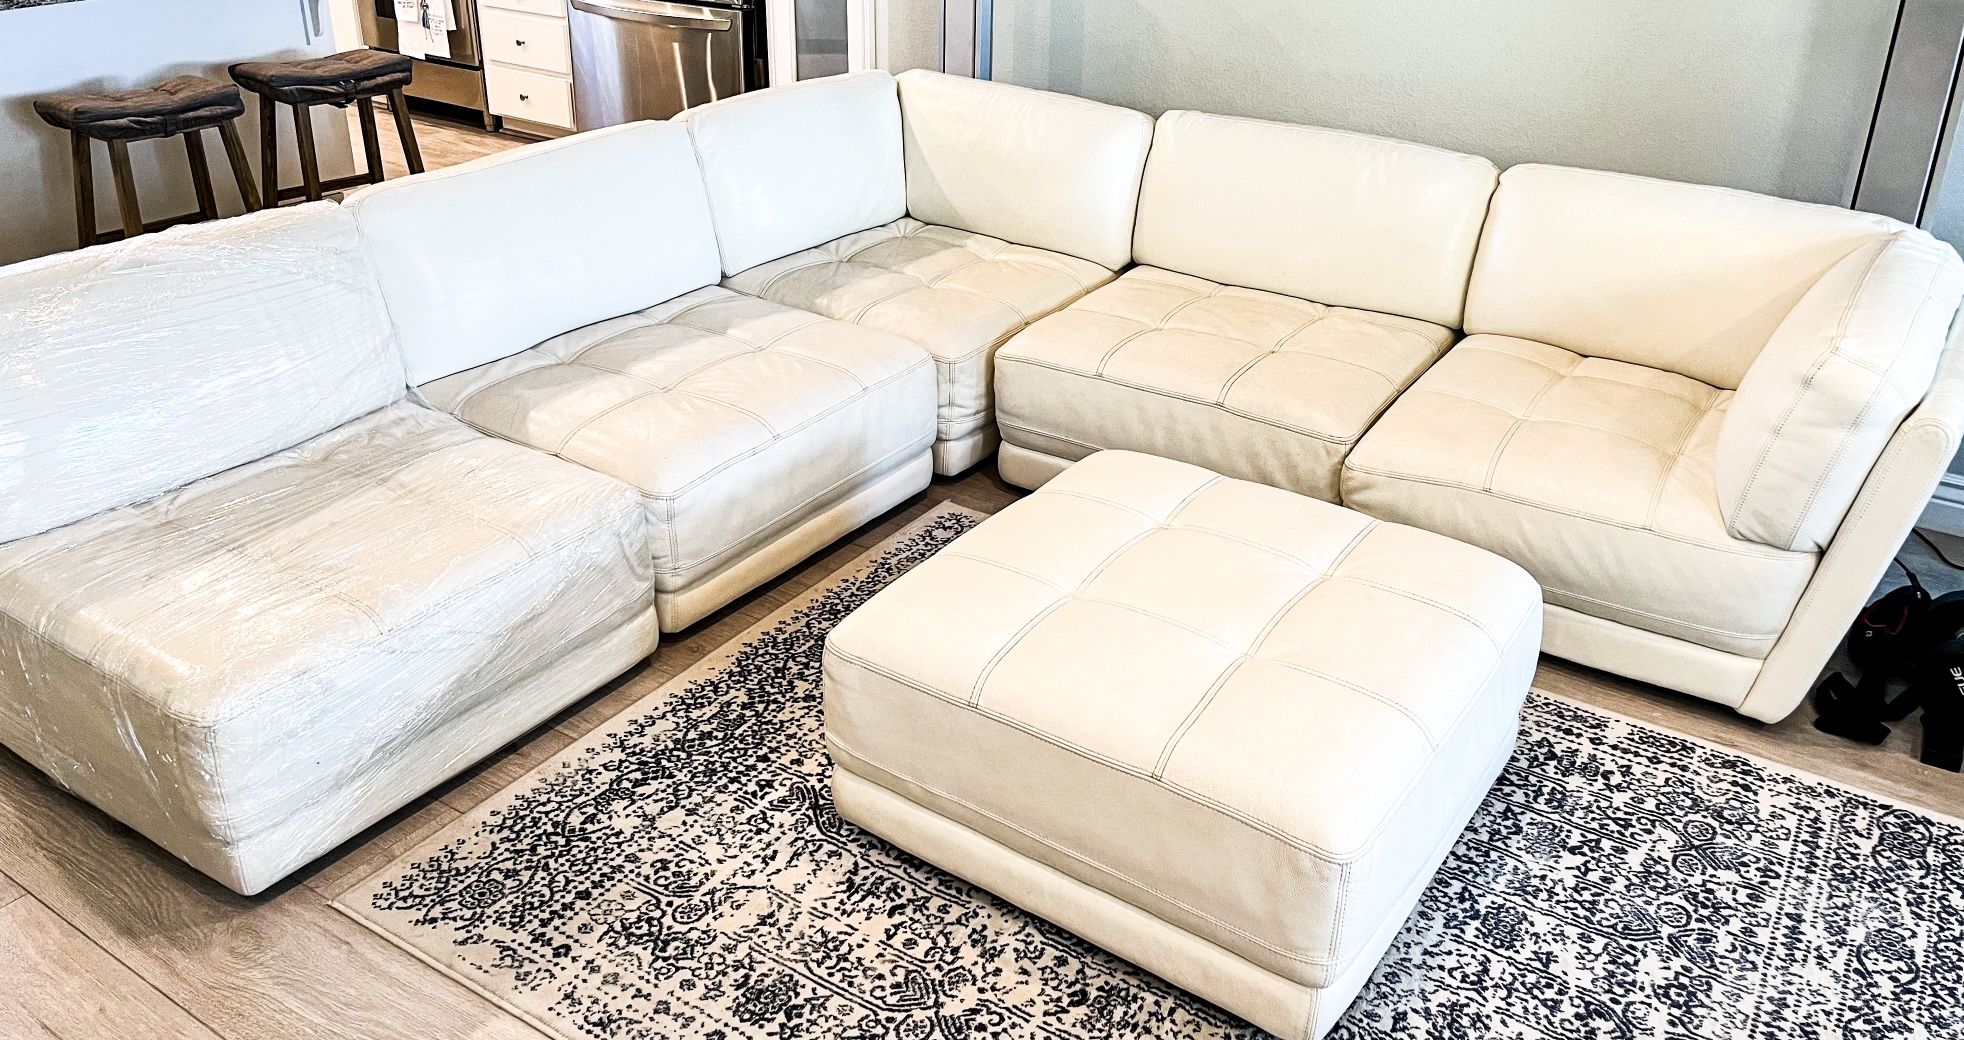 6 White Leather Sectional Sofa from Macys 